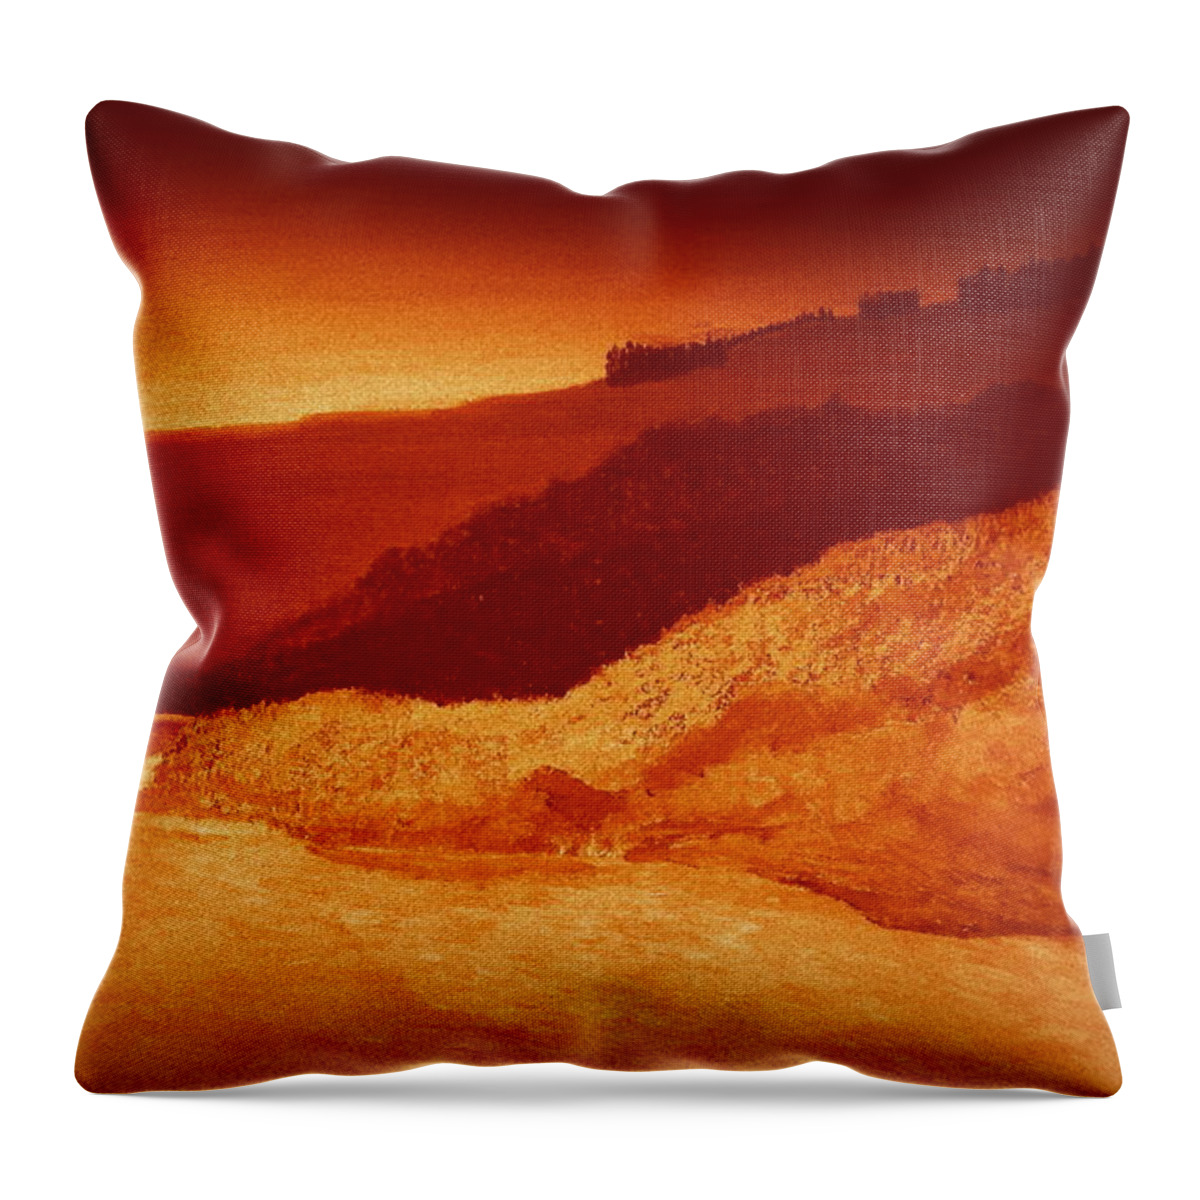 Dawn River Mountains Bridge Landscape Cold Lonely Rapids Throw Pillow featuring the painting Dawn by Bill OConnor